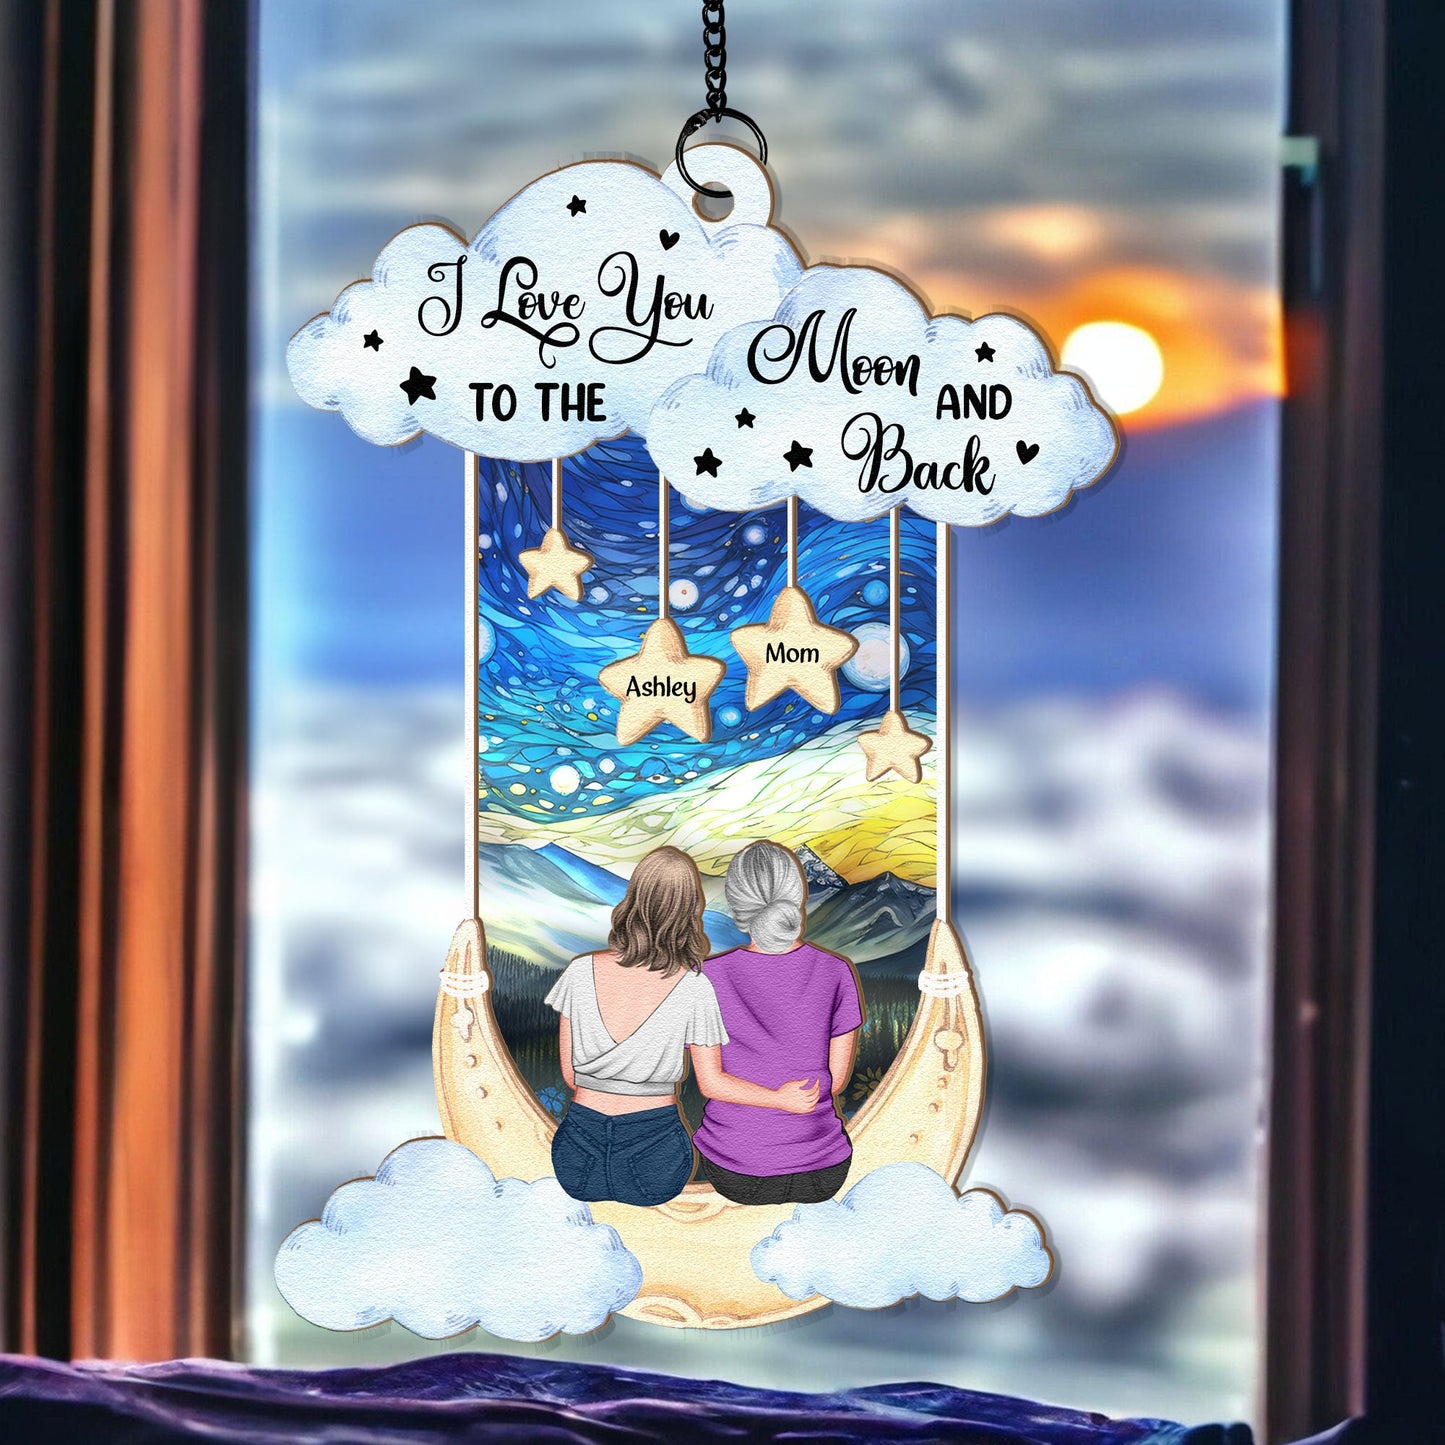 I Love You To The Moon & Back Mom - Personalized Window Hanging Suncatcher Ornament